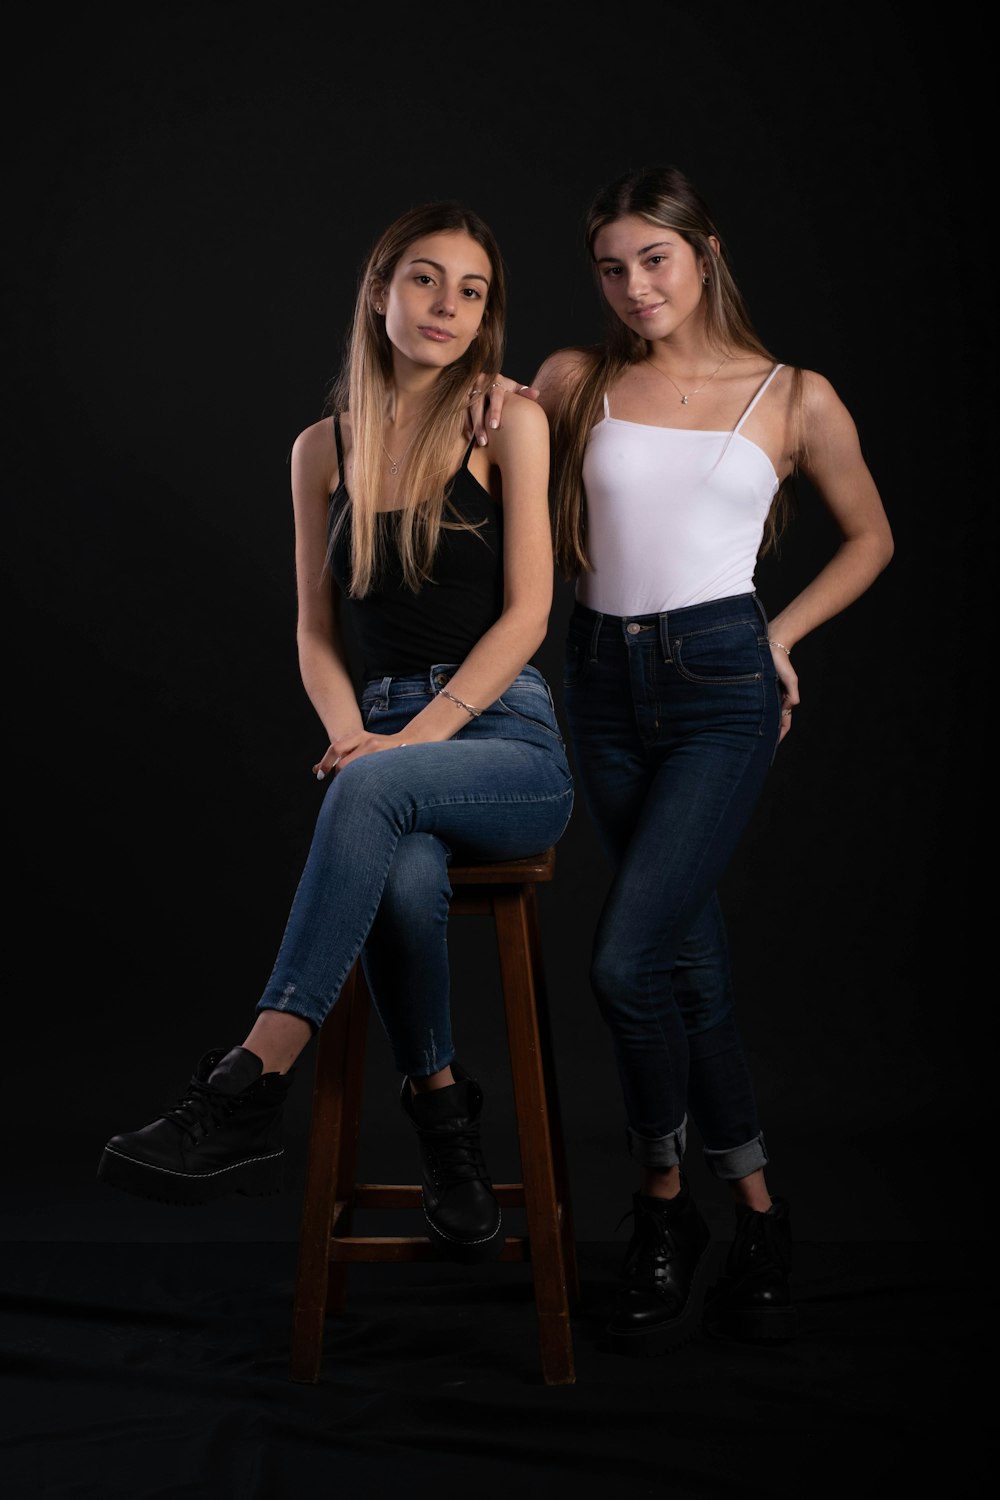 two women sitting on stools